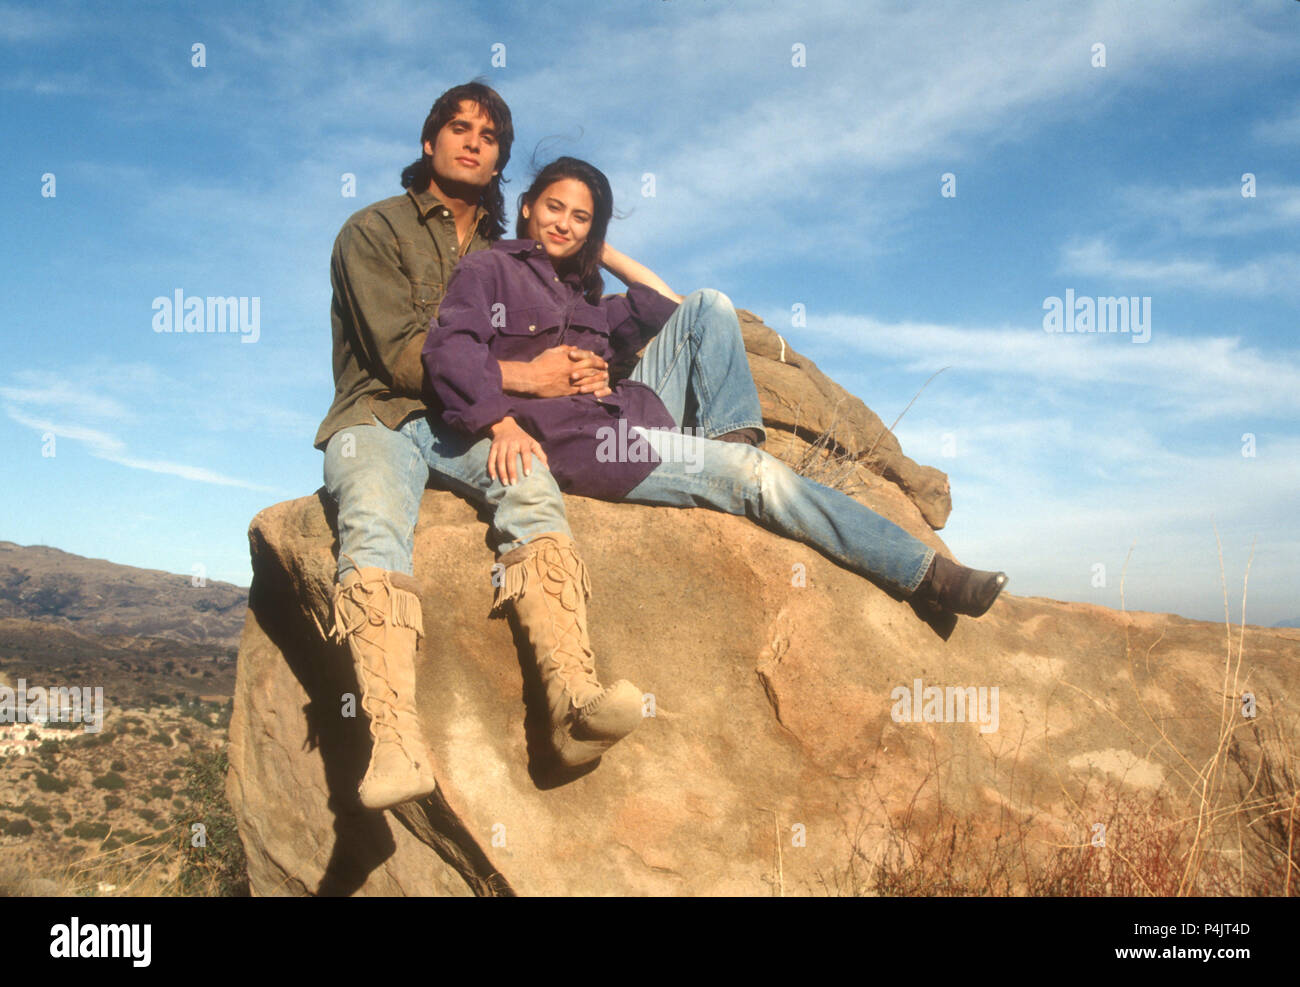 AGUA DULCE, CA - NOVEMBER 21: (EXCLUSIVE COVERAGE) Actor John Haymes Newton, aka John Newton and actress Judie Aronson on location filming 'Desert Kickboxer' on November 21, 1991 at Vasquez Rocks in Agua Dulce, California. Photo by Barry King/Alamy Stock Photo Stock Photo